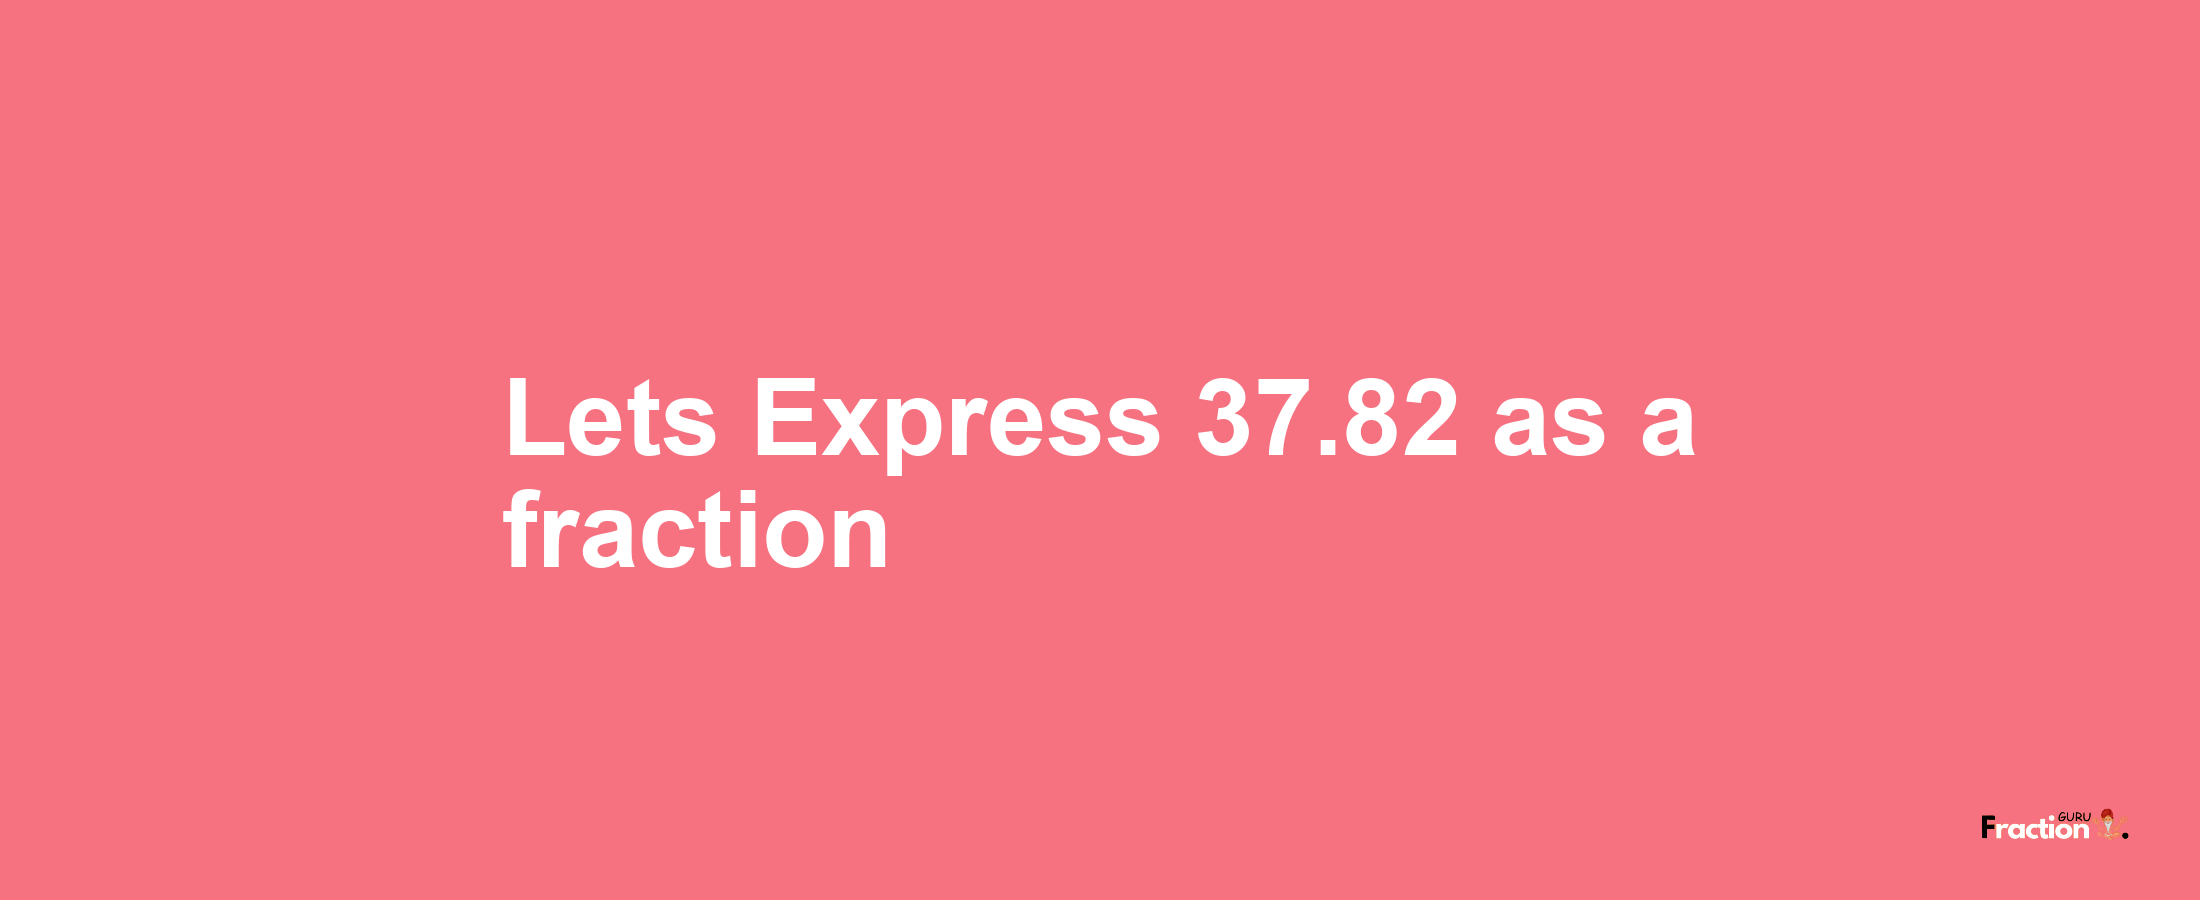 Lets Express 37.82 as afraction